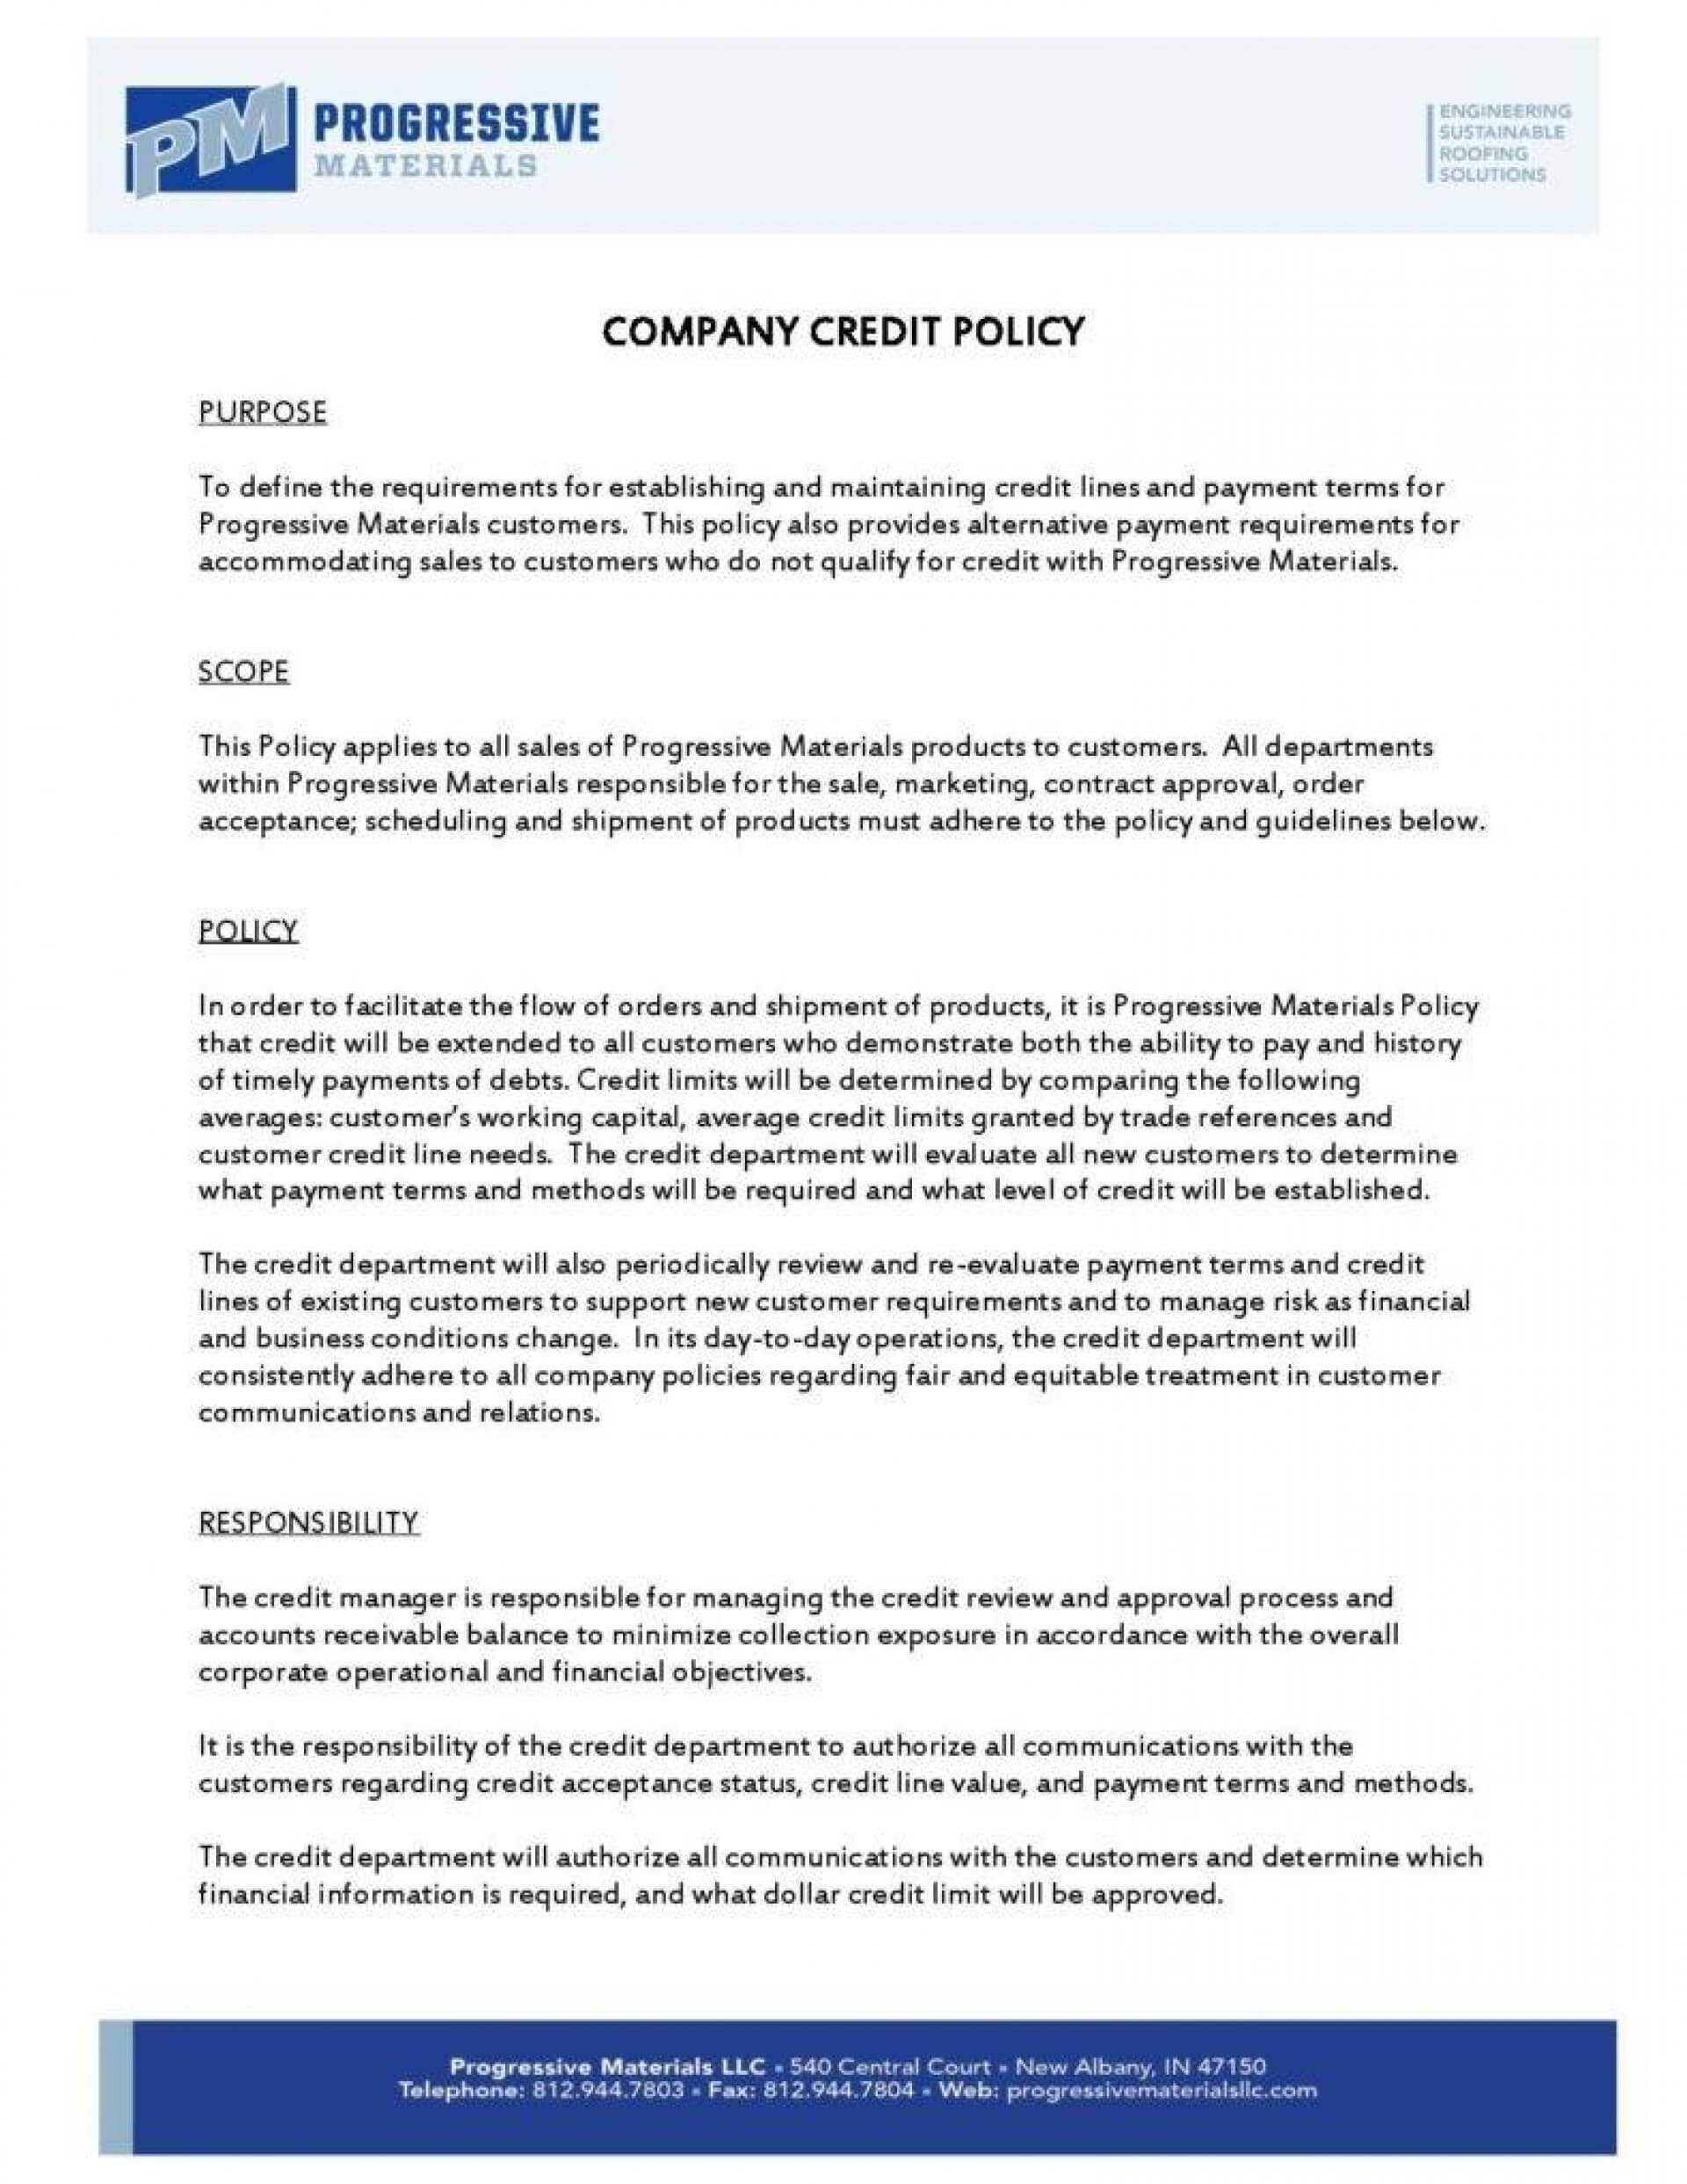 002 Template Ideas Dress Code Policy Company Credit Page For Company Credit Card Policy Template